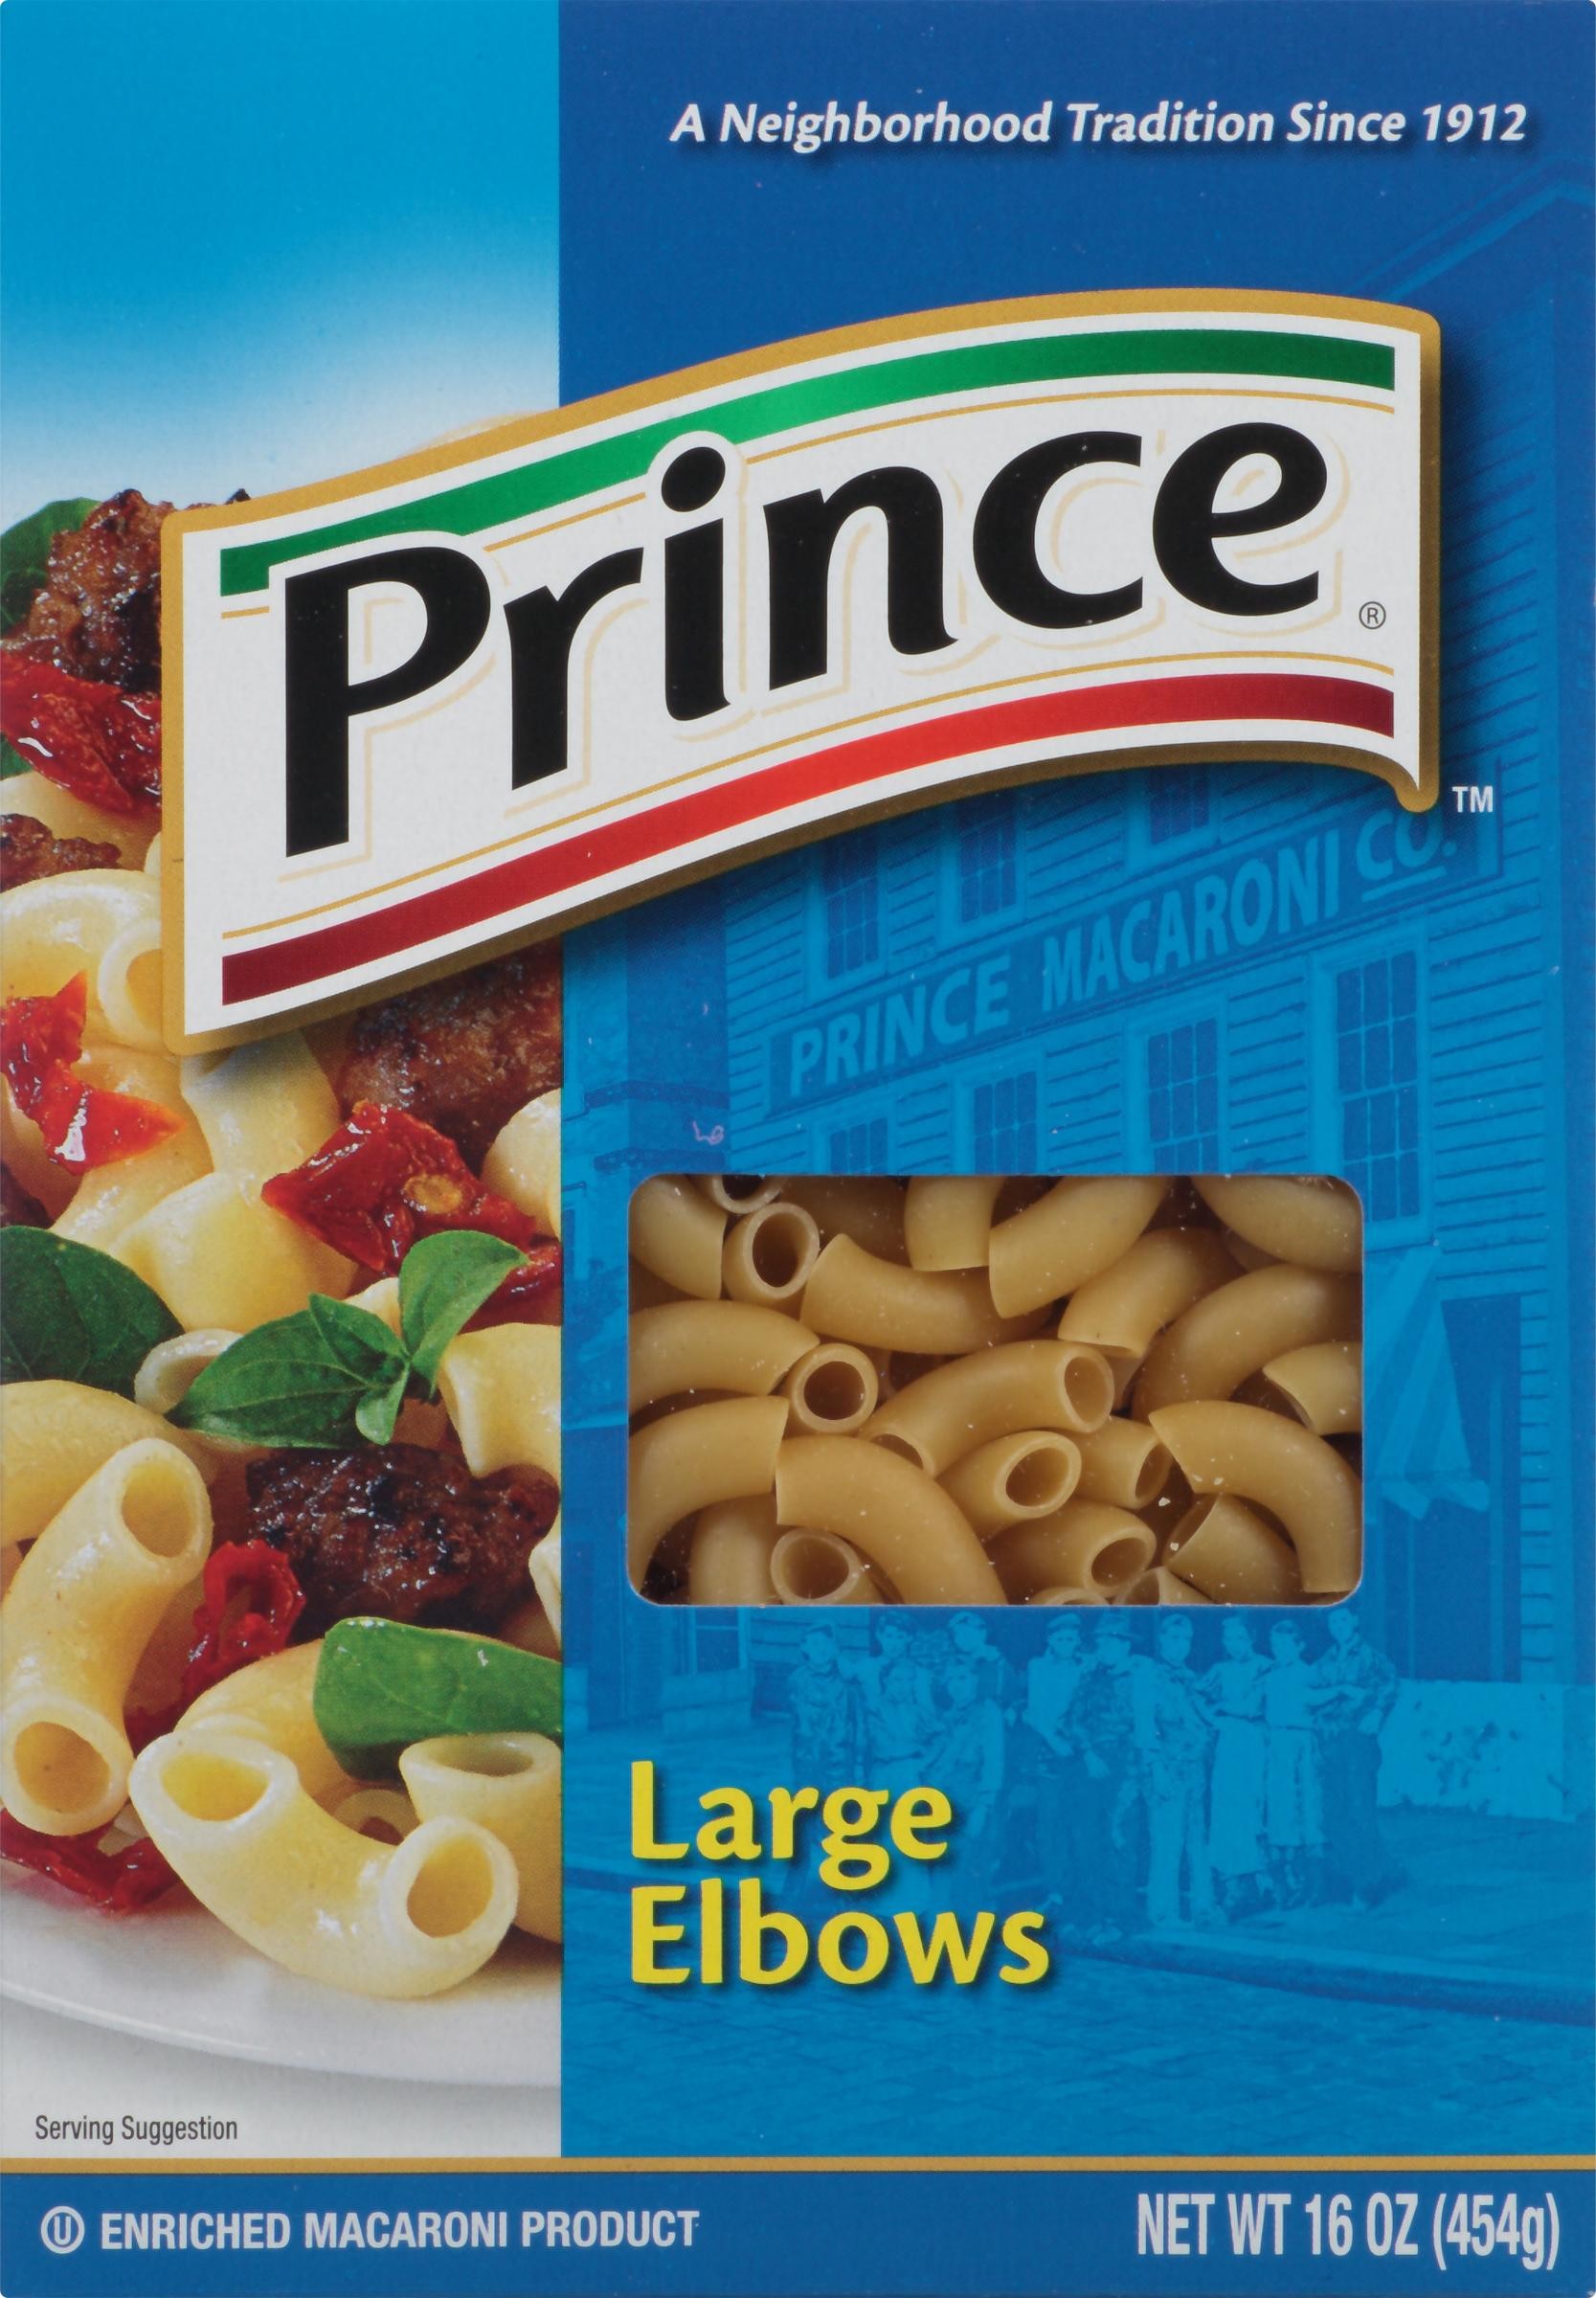 Prince, Enriched Macaroni Product, Large Elbows